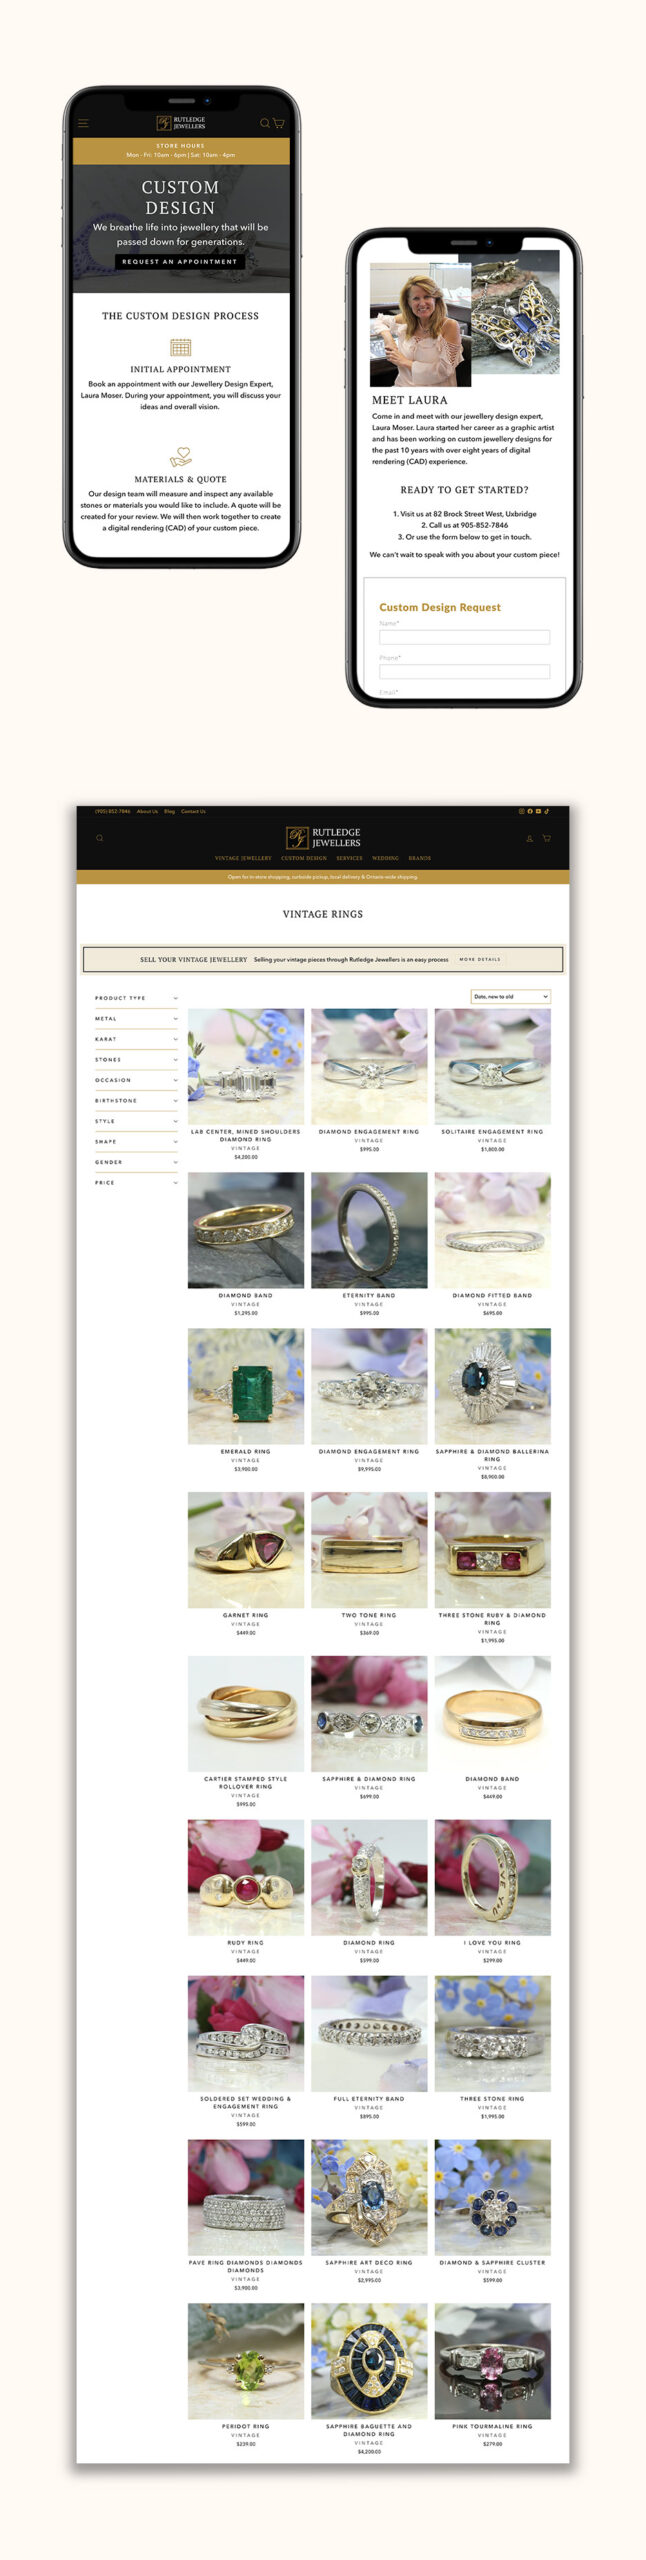 rutledge-jewelers-ring-page-mobile-website-design